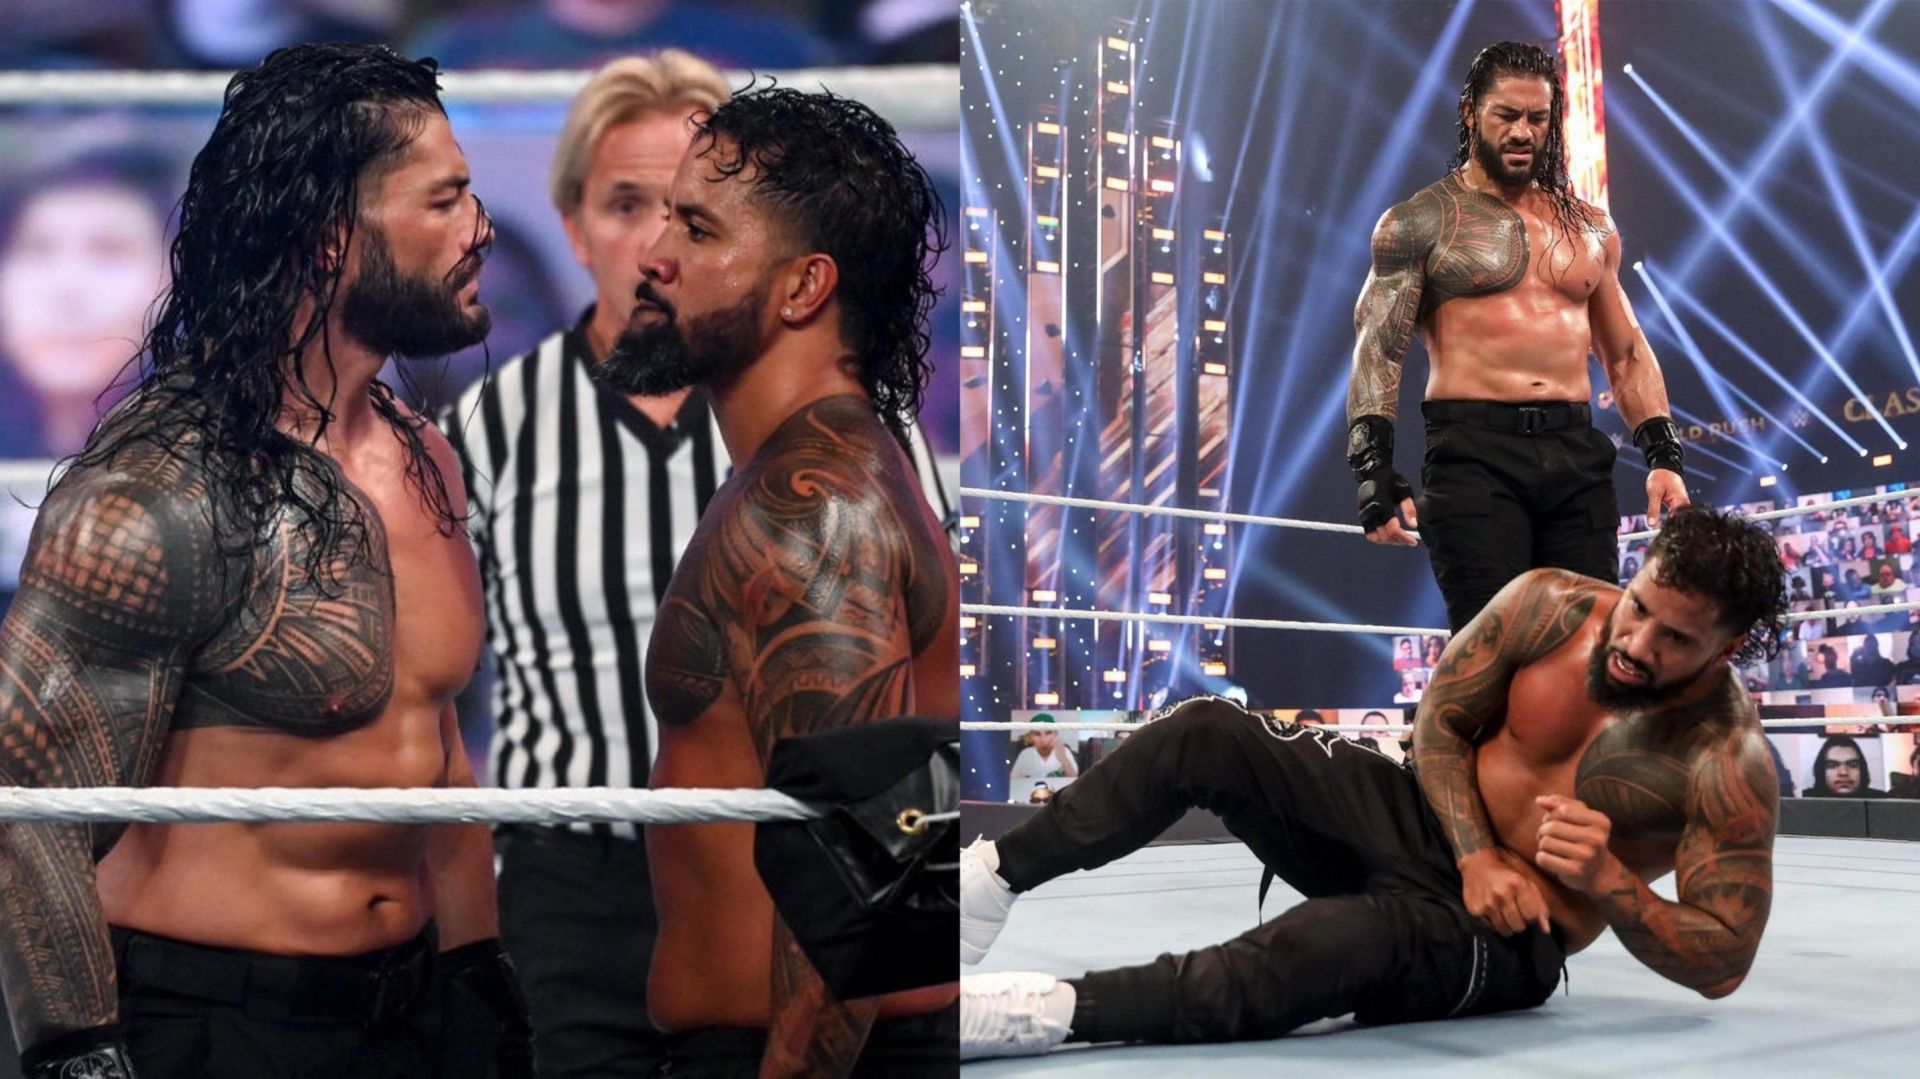 Jey Uso and Roman Reigns collided at SummerSlam!